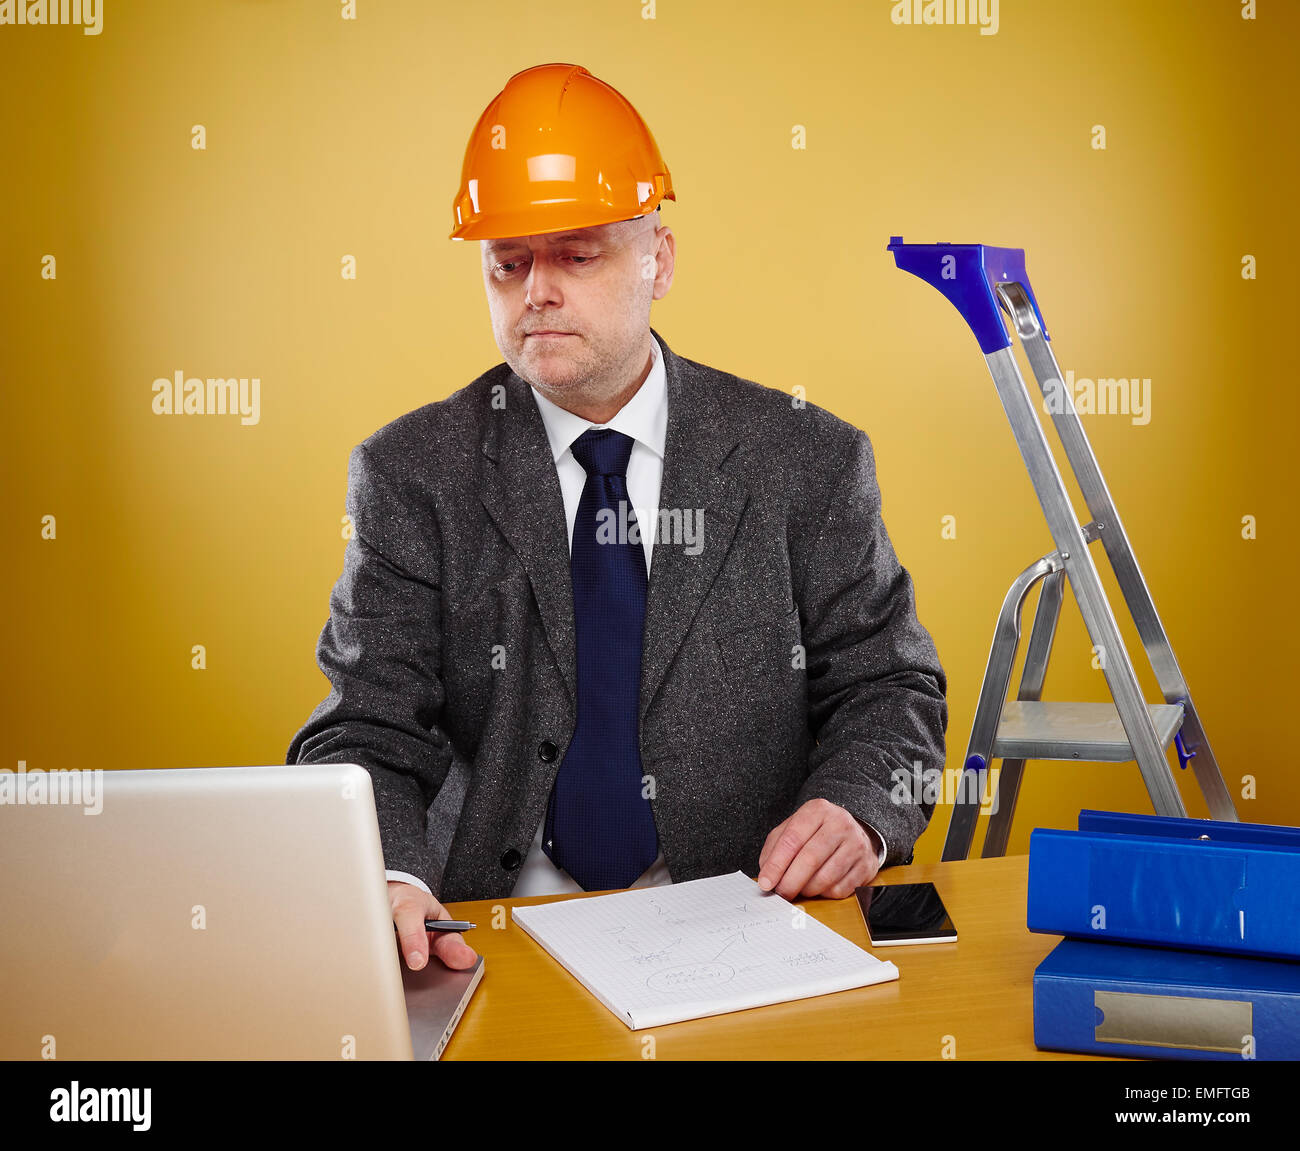 Working male engineer in office, he wearing a white shirt and tie and coat, head he wears a orange hard hat Stock Photo